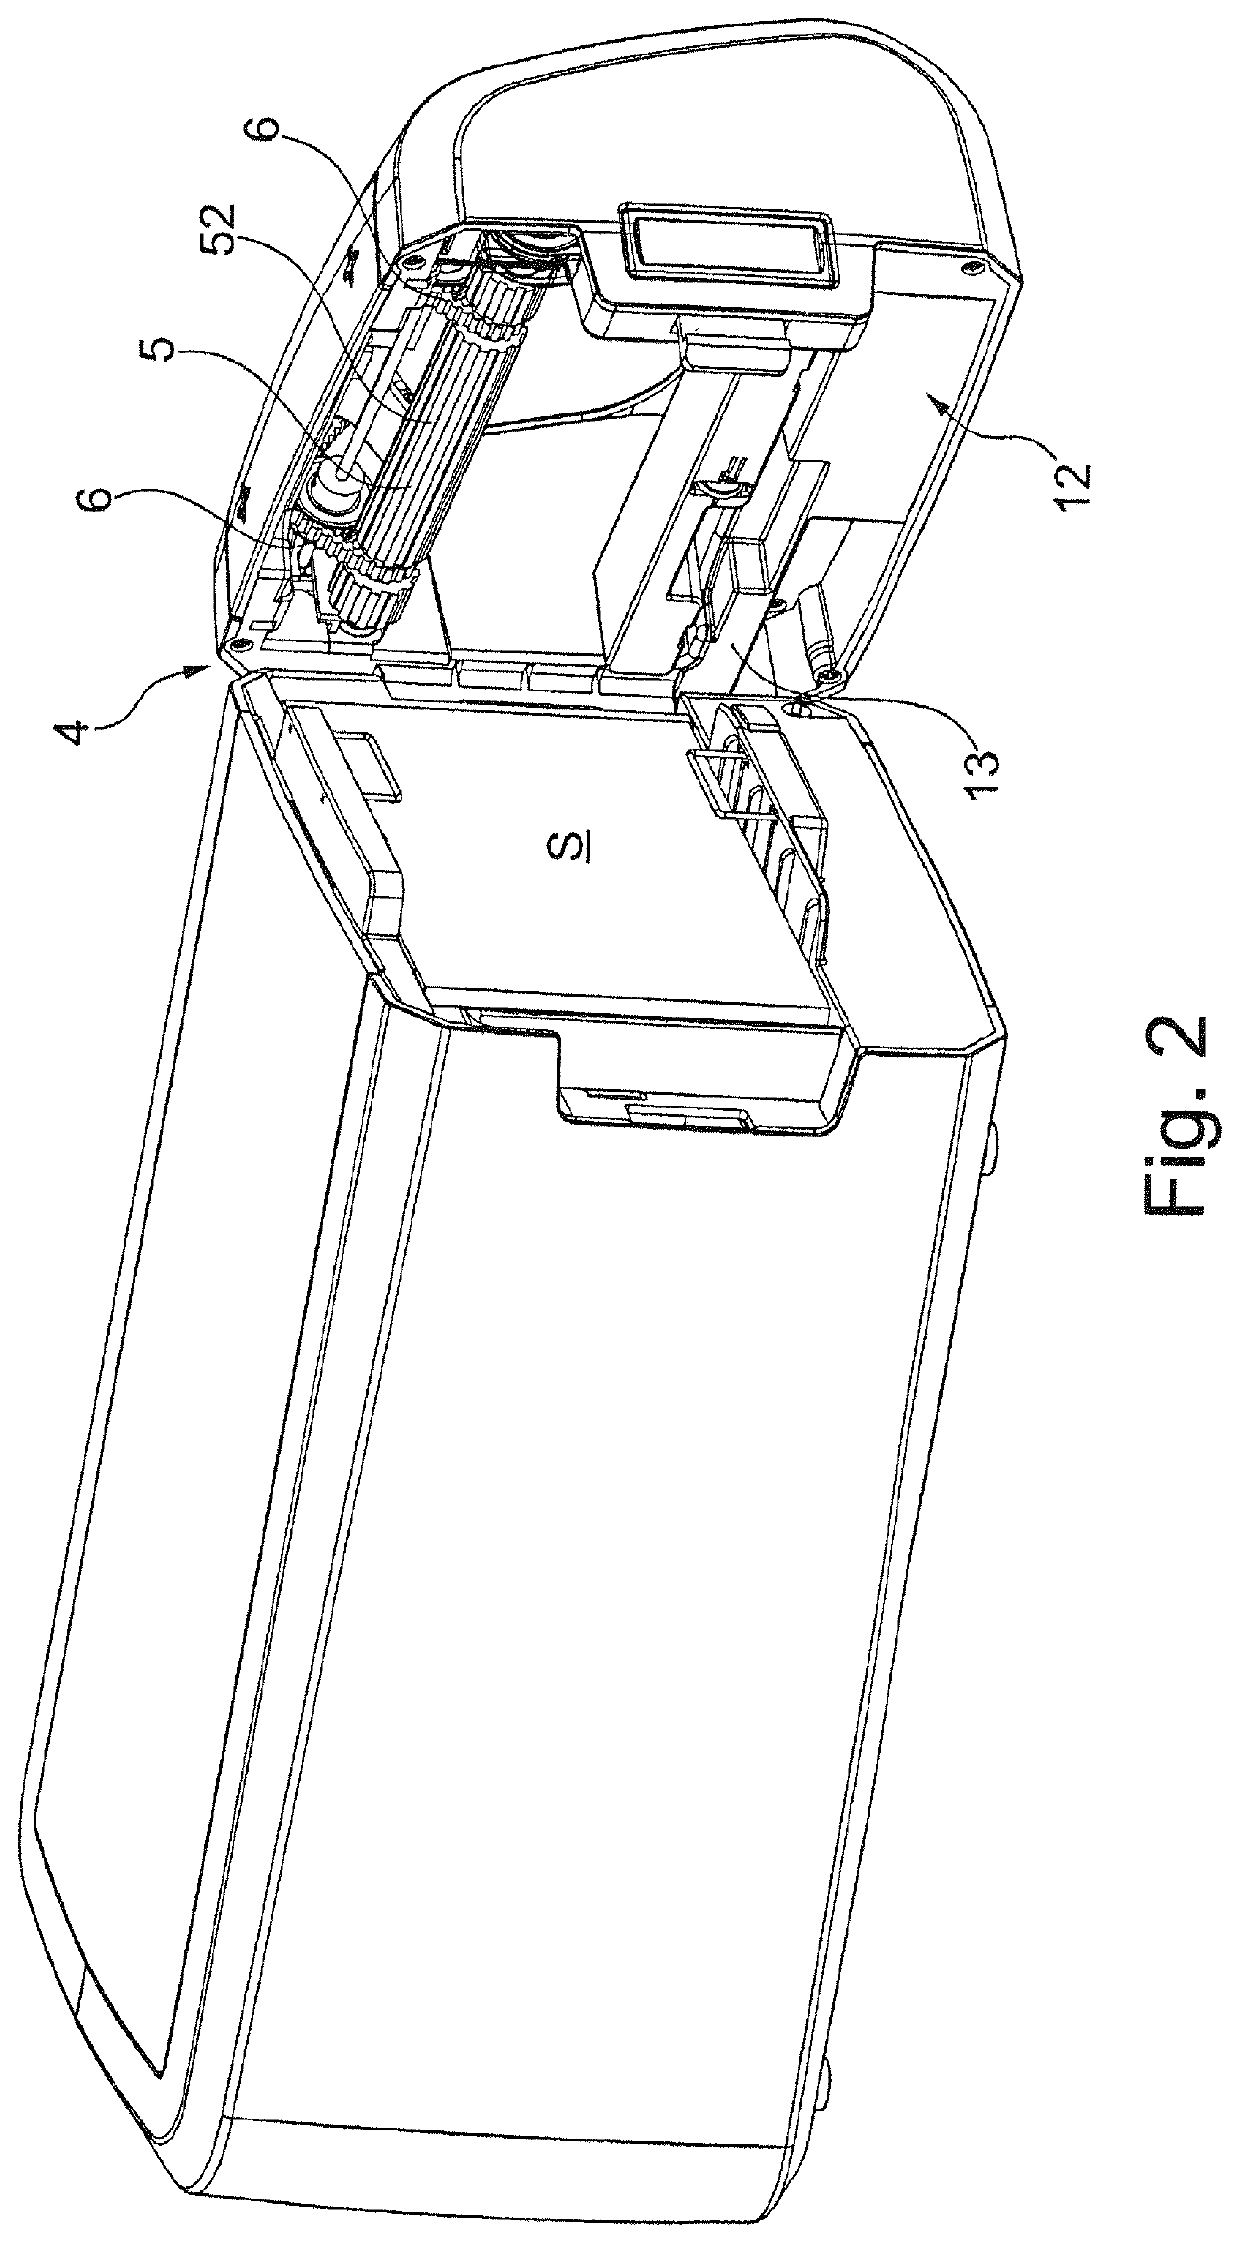 Dispenser for sheet products and operating method